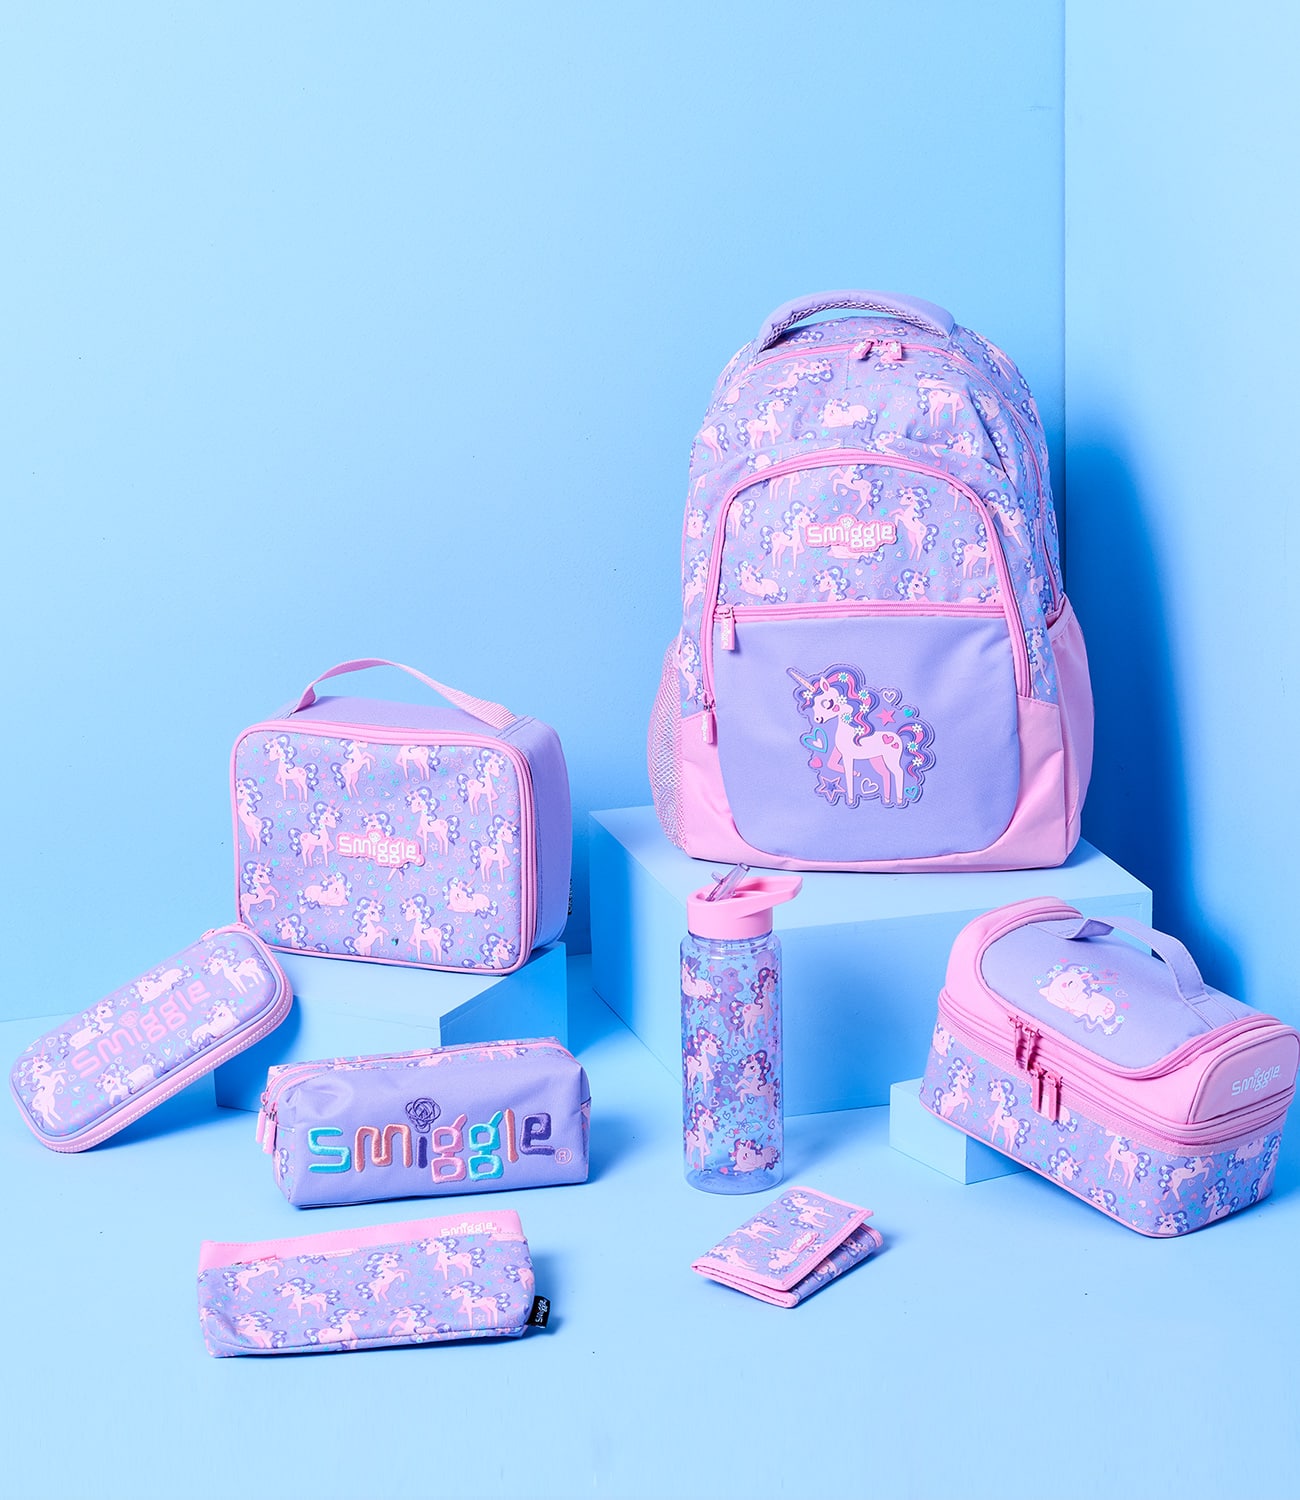 Unicorns - All the Mythical Magic is at Smiggle | Smiggle™ Online